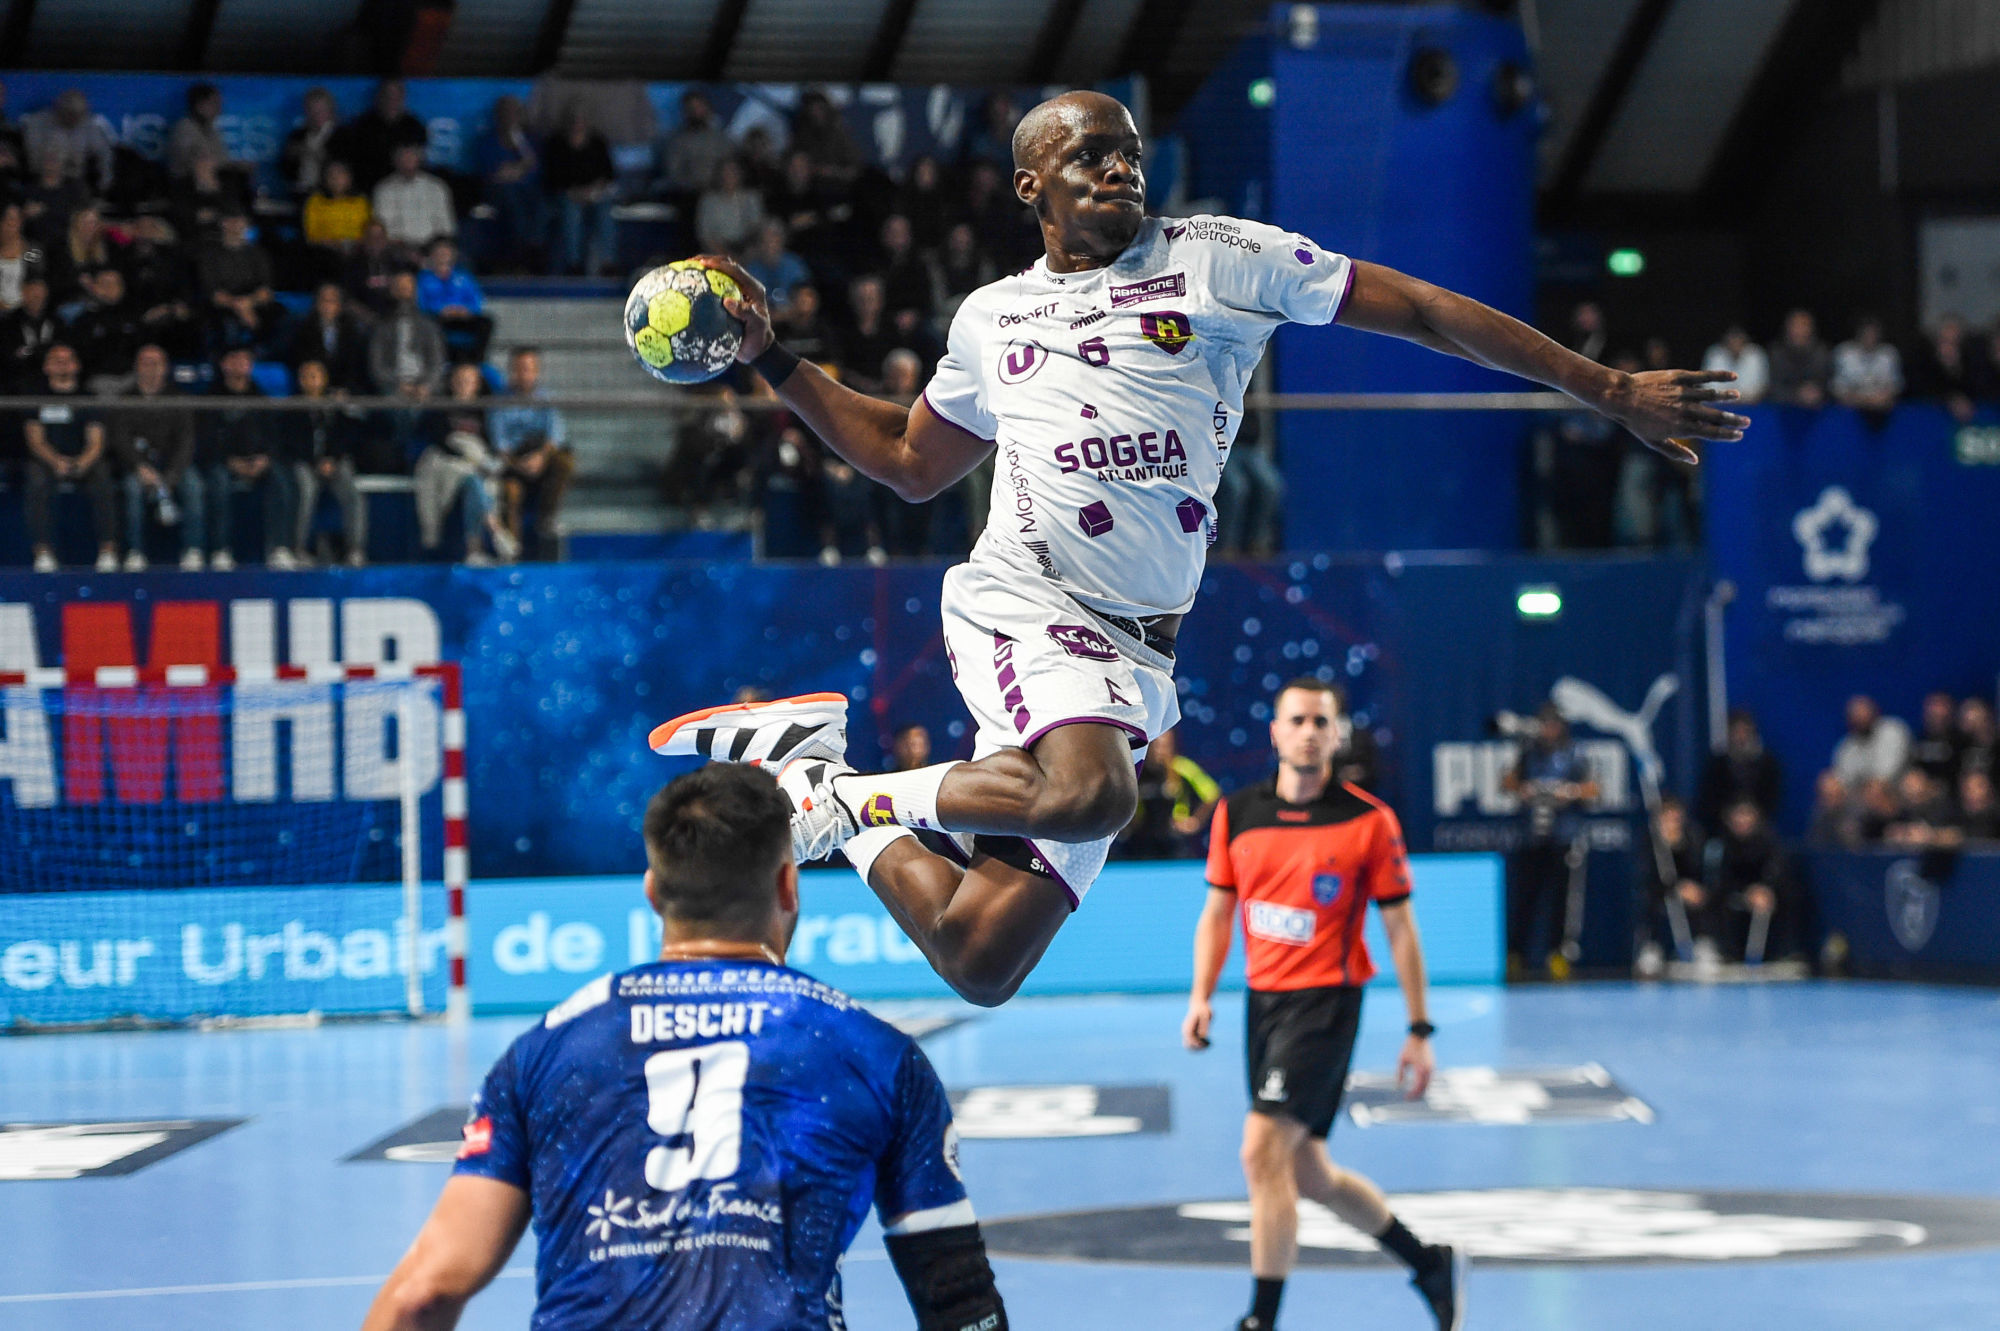 Olivier NYOKAS of Nantes  during the French Lidl Starligue Handball match between Montpellier and Nantes on December 19, 2019 in Montpellier, France. (Photo by Alexandre Dimou/Icon Sport) - Olivier NYOKAS - Palais des sports Pierre-de-Coubertin - Montpellier (France)